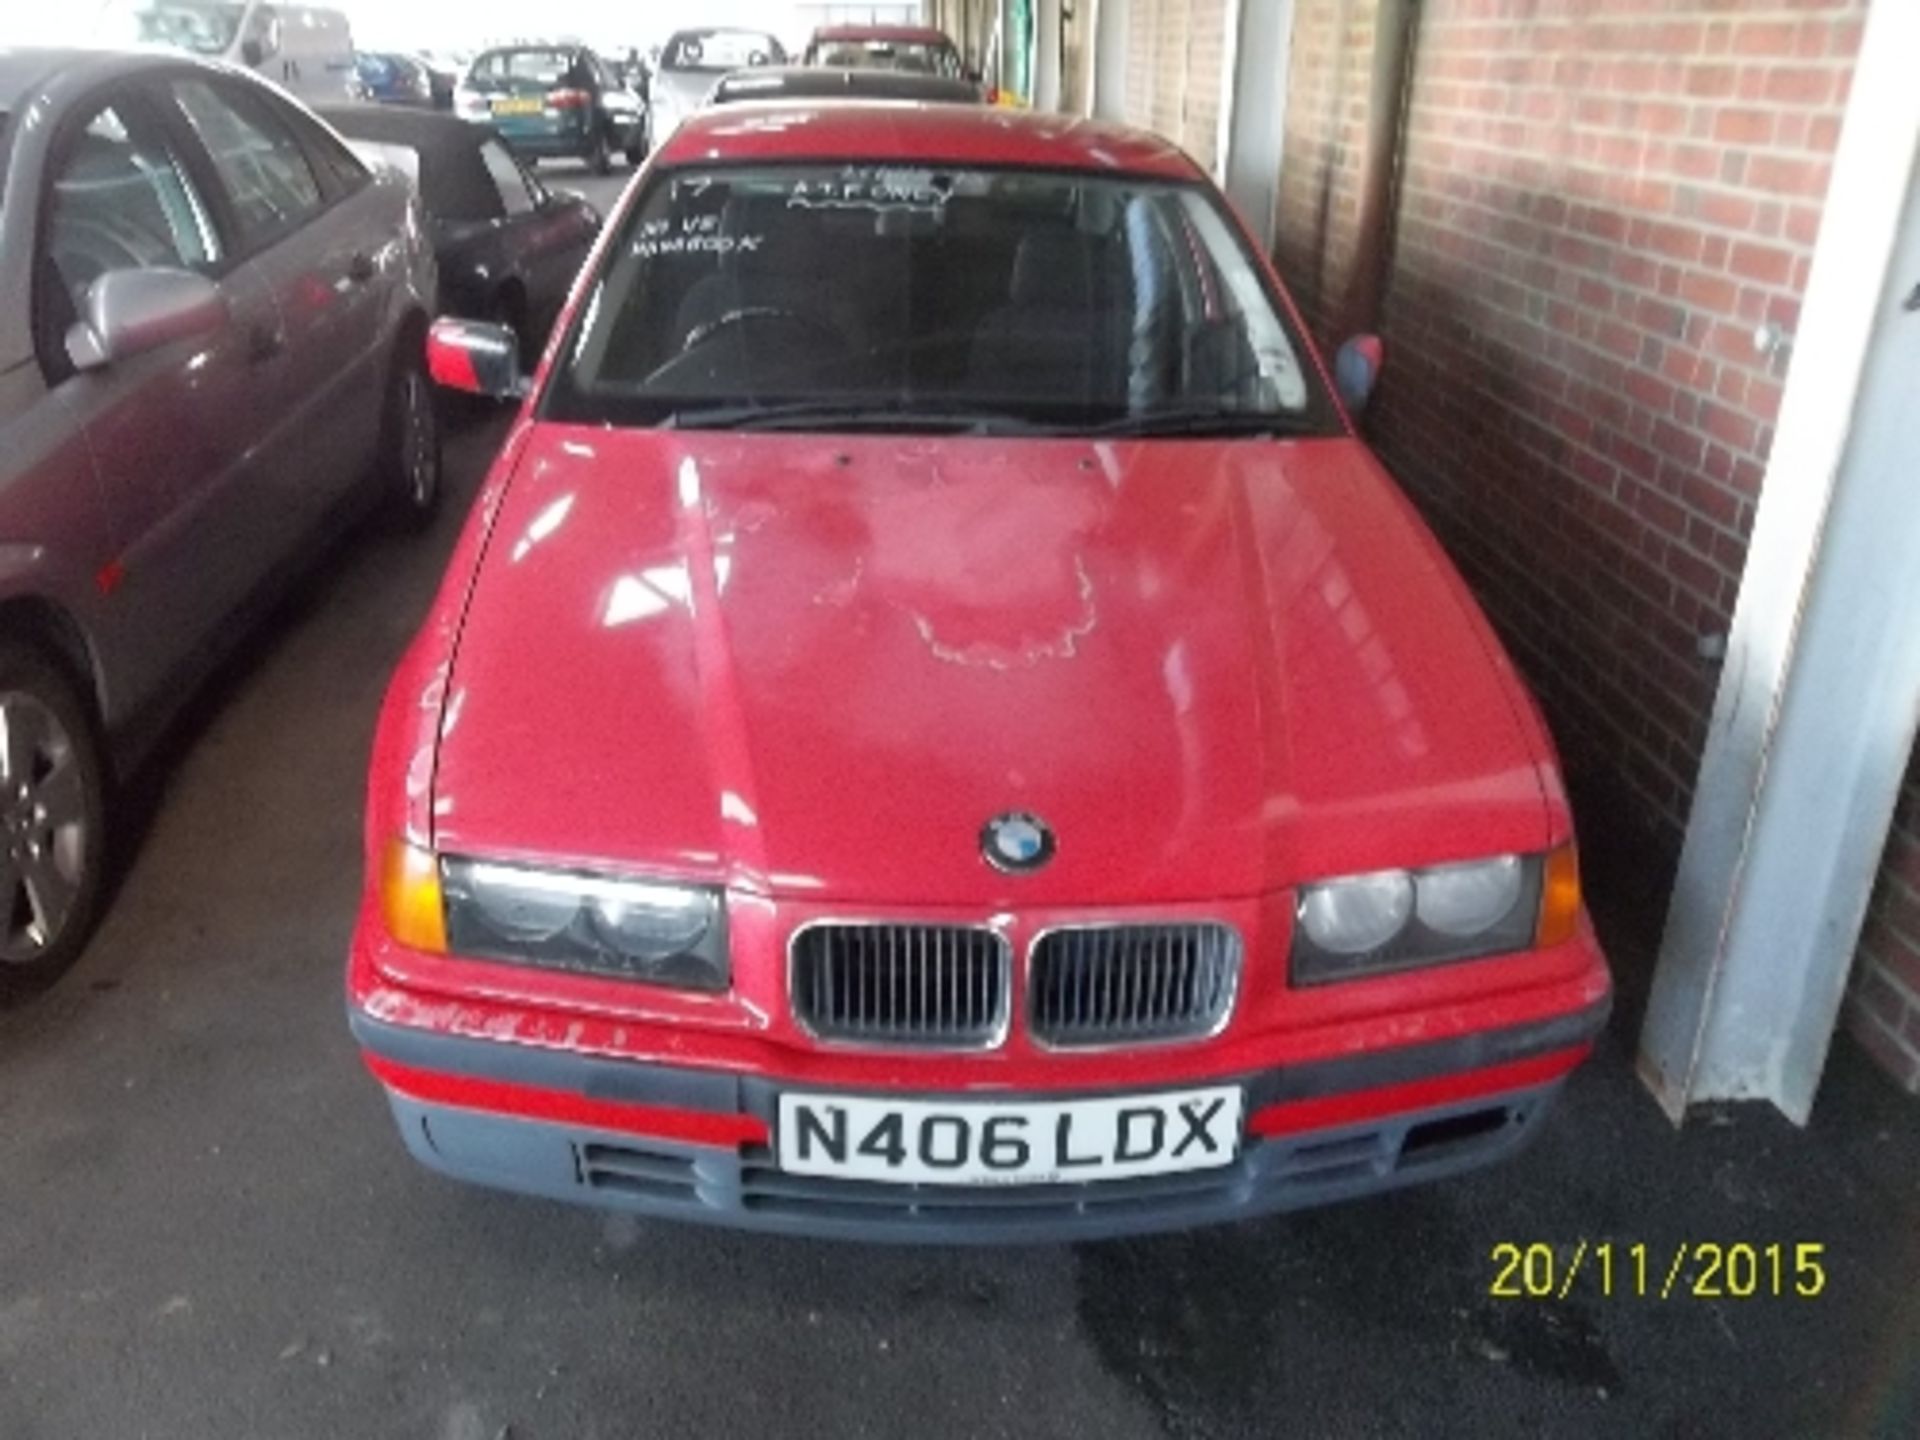 BMW 318 TDS - N406 LDX This vehicle may be purchased only by the holder of an ATF certificate and